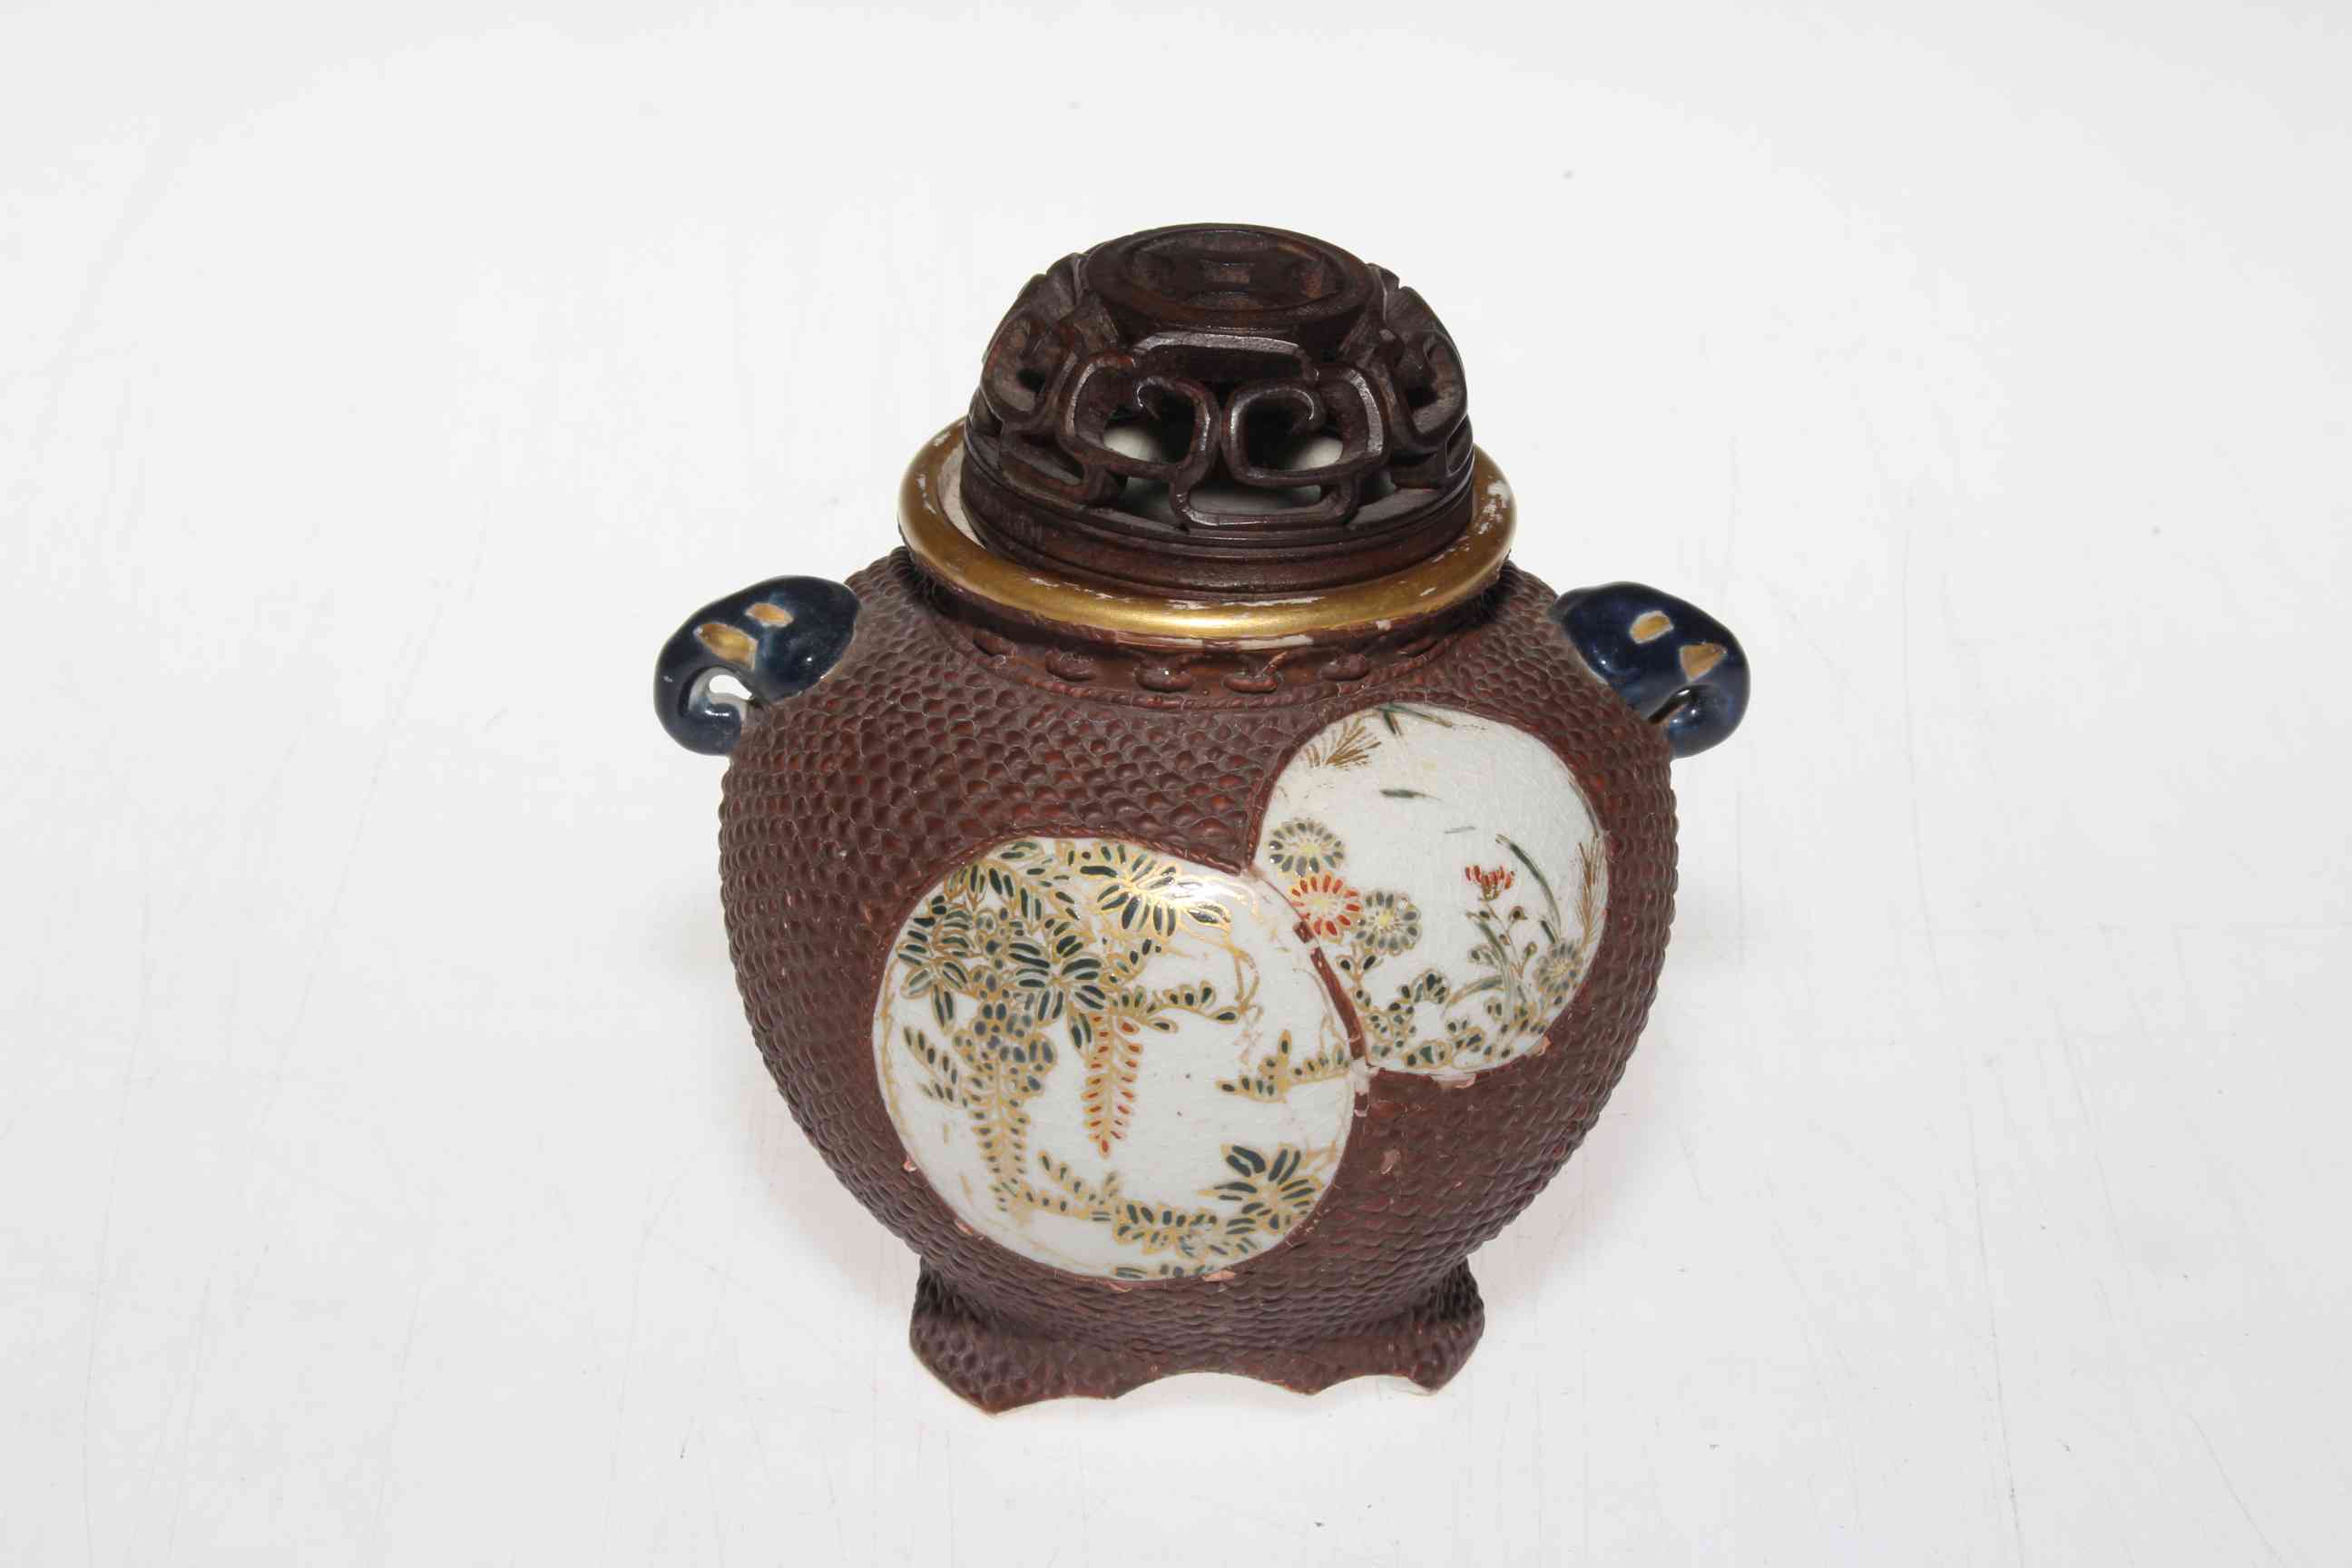 Japanese pot pourri with carved wood cover, 12cm.